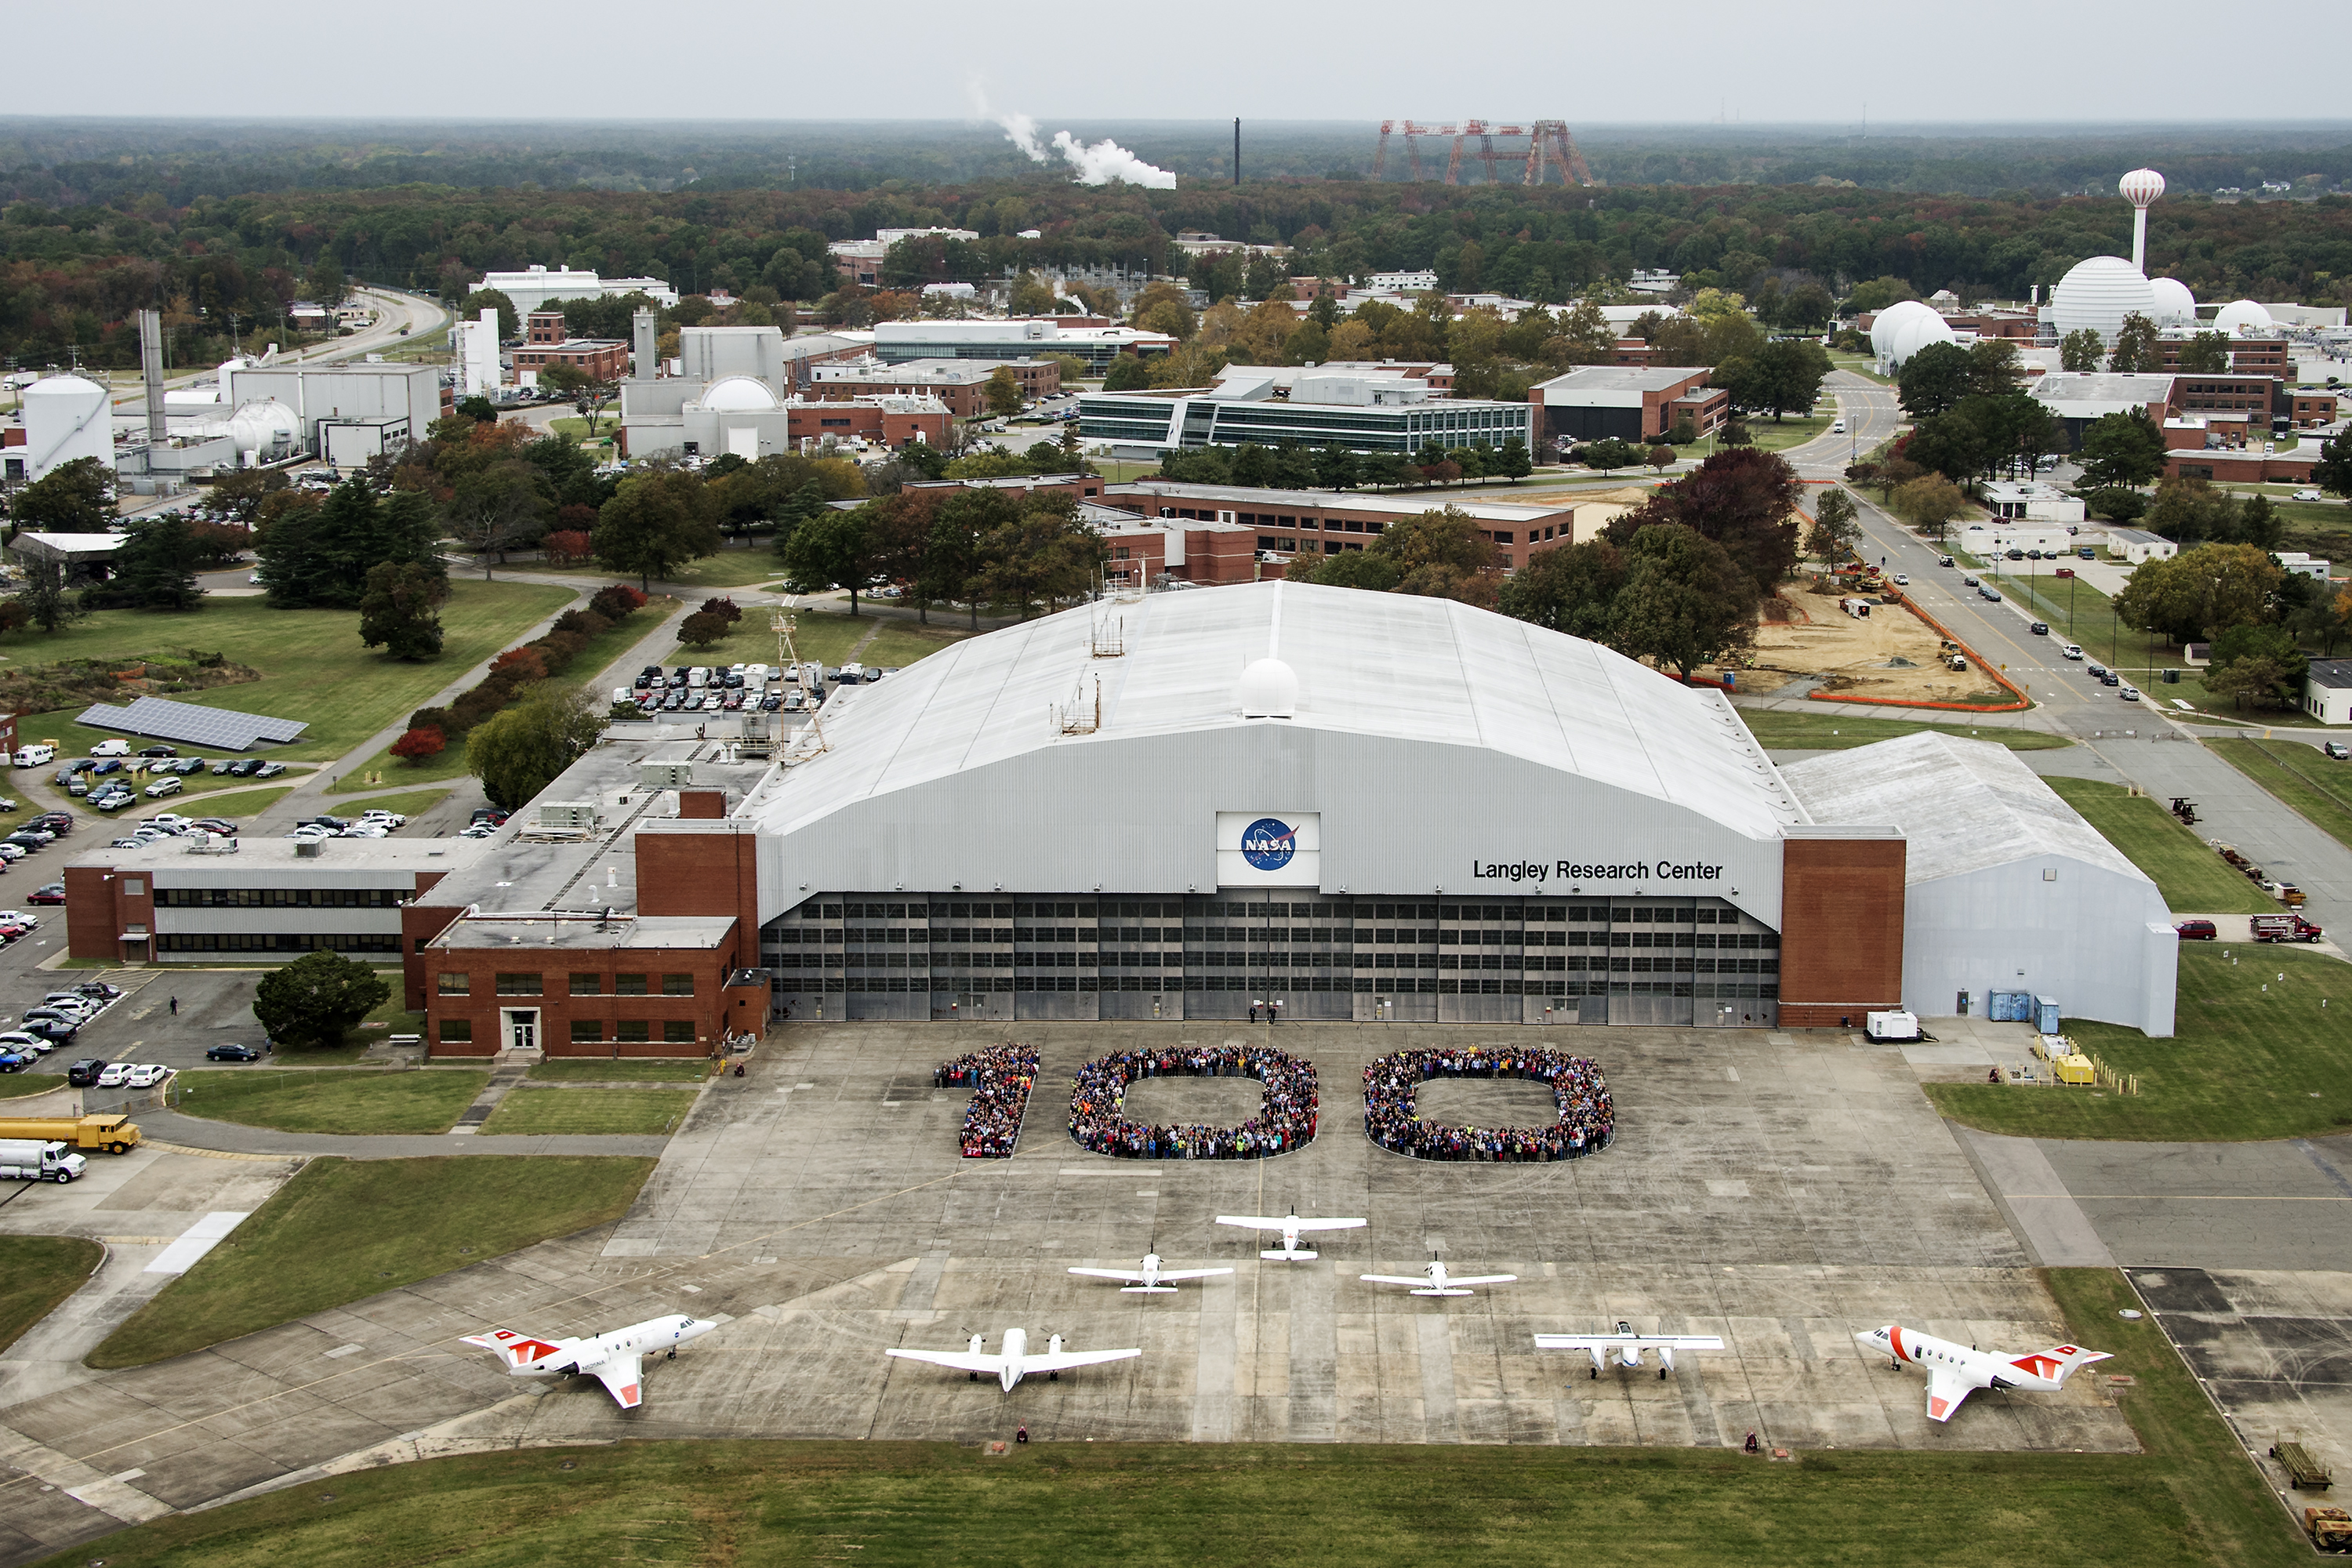 Aerial photos of NASA Langley employees gathered on the back ramp in the shape of 100.